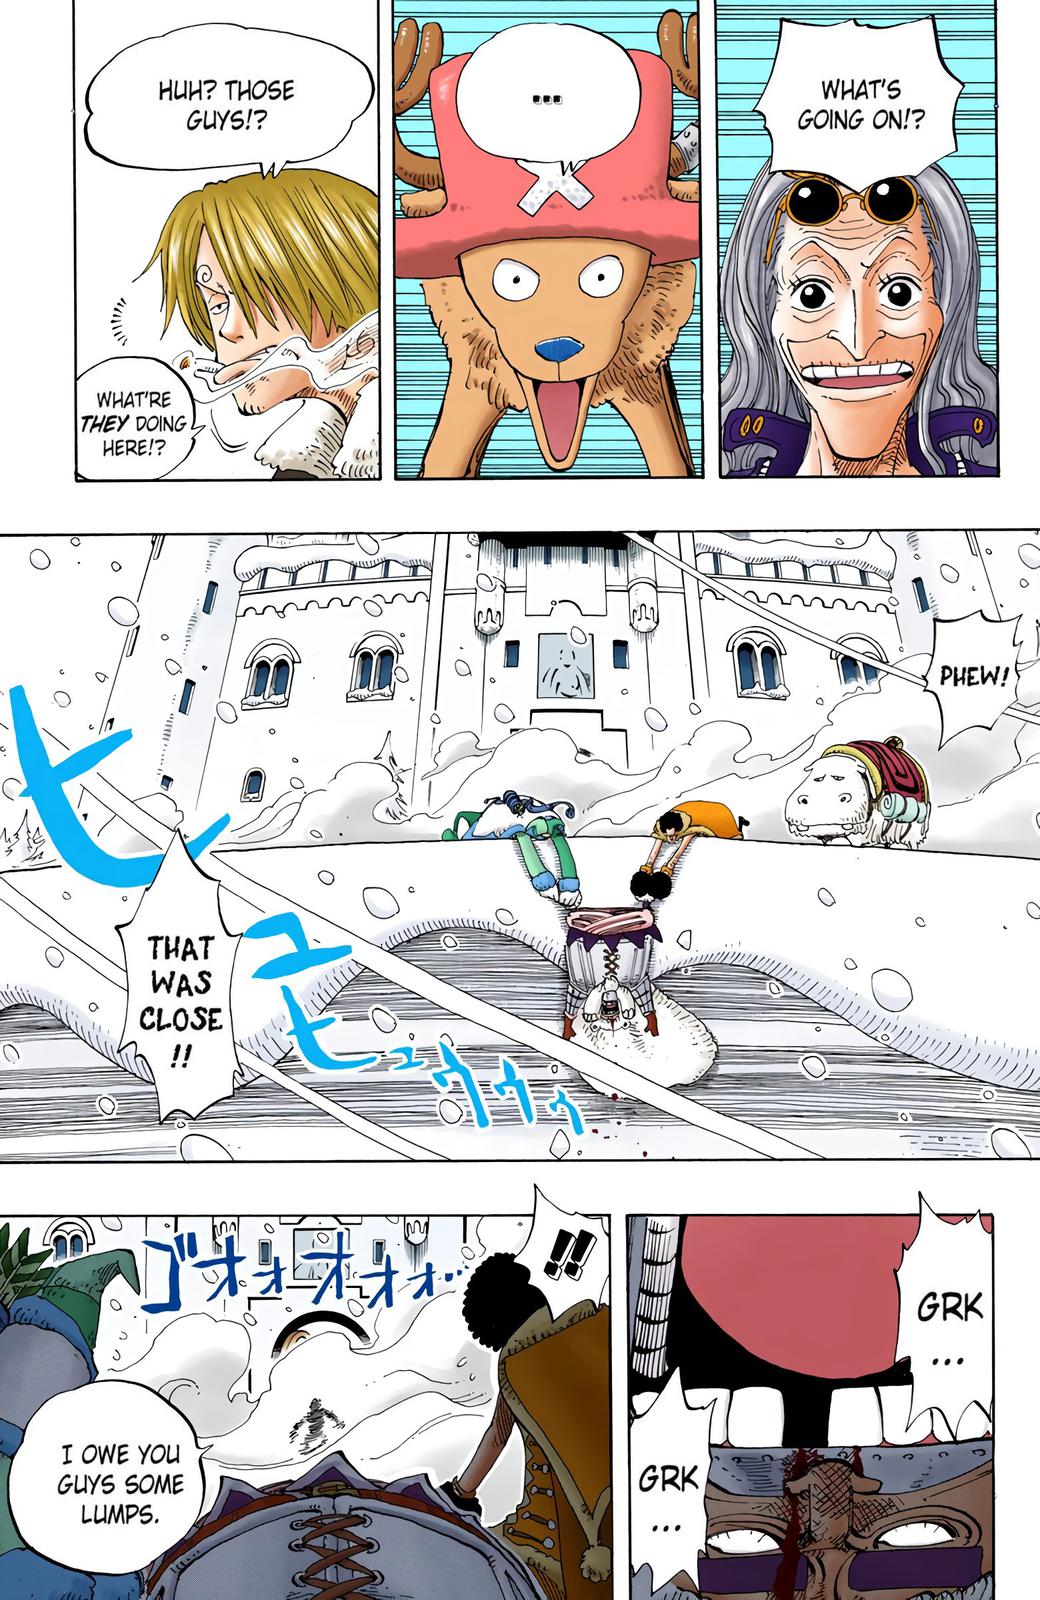 Character Discussion - Sanji and Chopper The MOST underrated Strawhat  Relationship